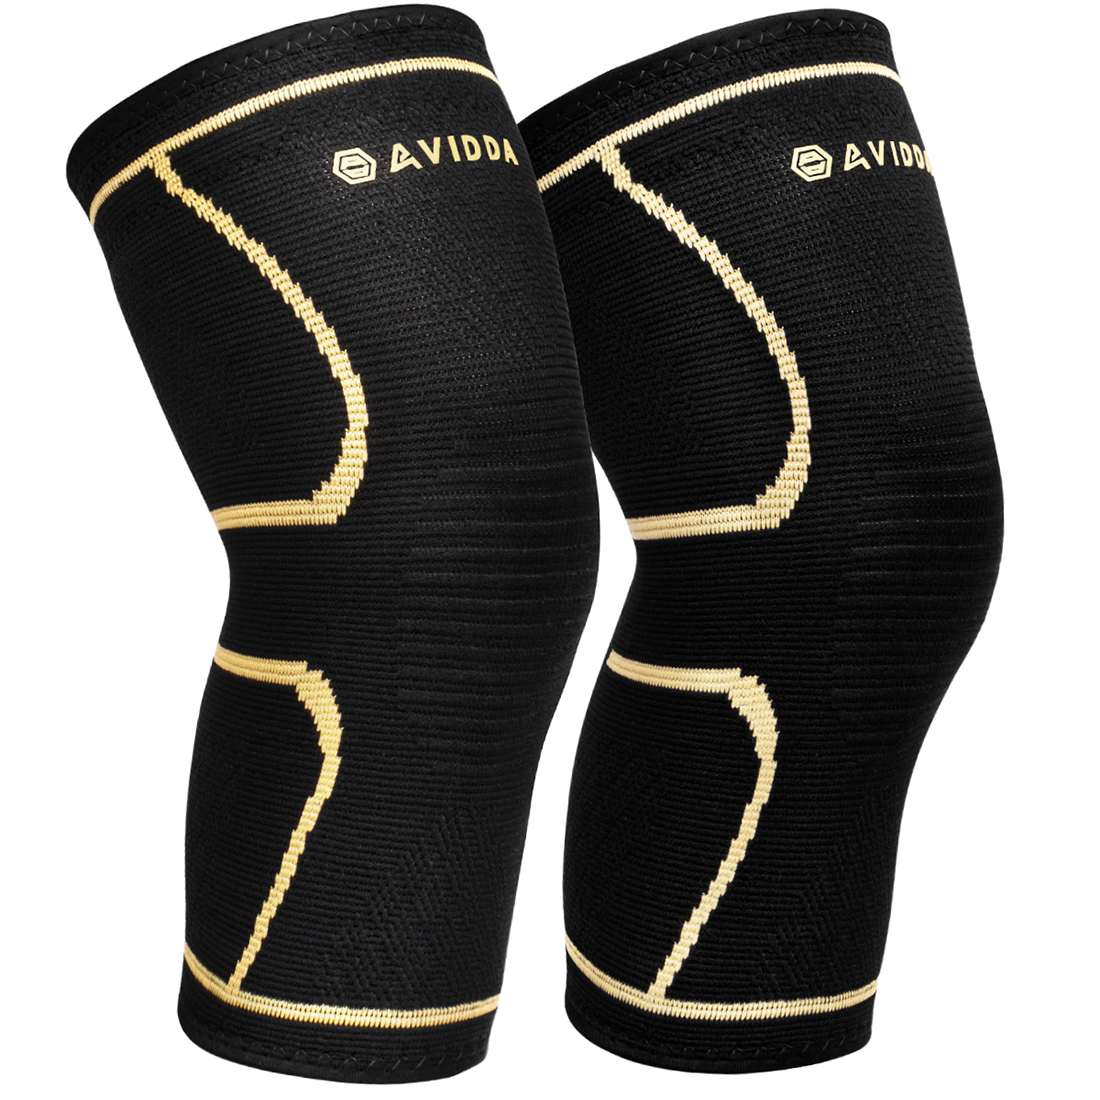 AVIDDA Knee Support Brace 2 Pack - Compression Knee Sleeves for Arthritis, Joint Pain, Ligament Injury, Meniscus Tear, ACL, MCL, Tendonitis, Running, Squats, Sports (Black Gold, S)